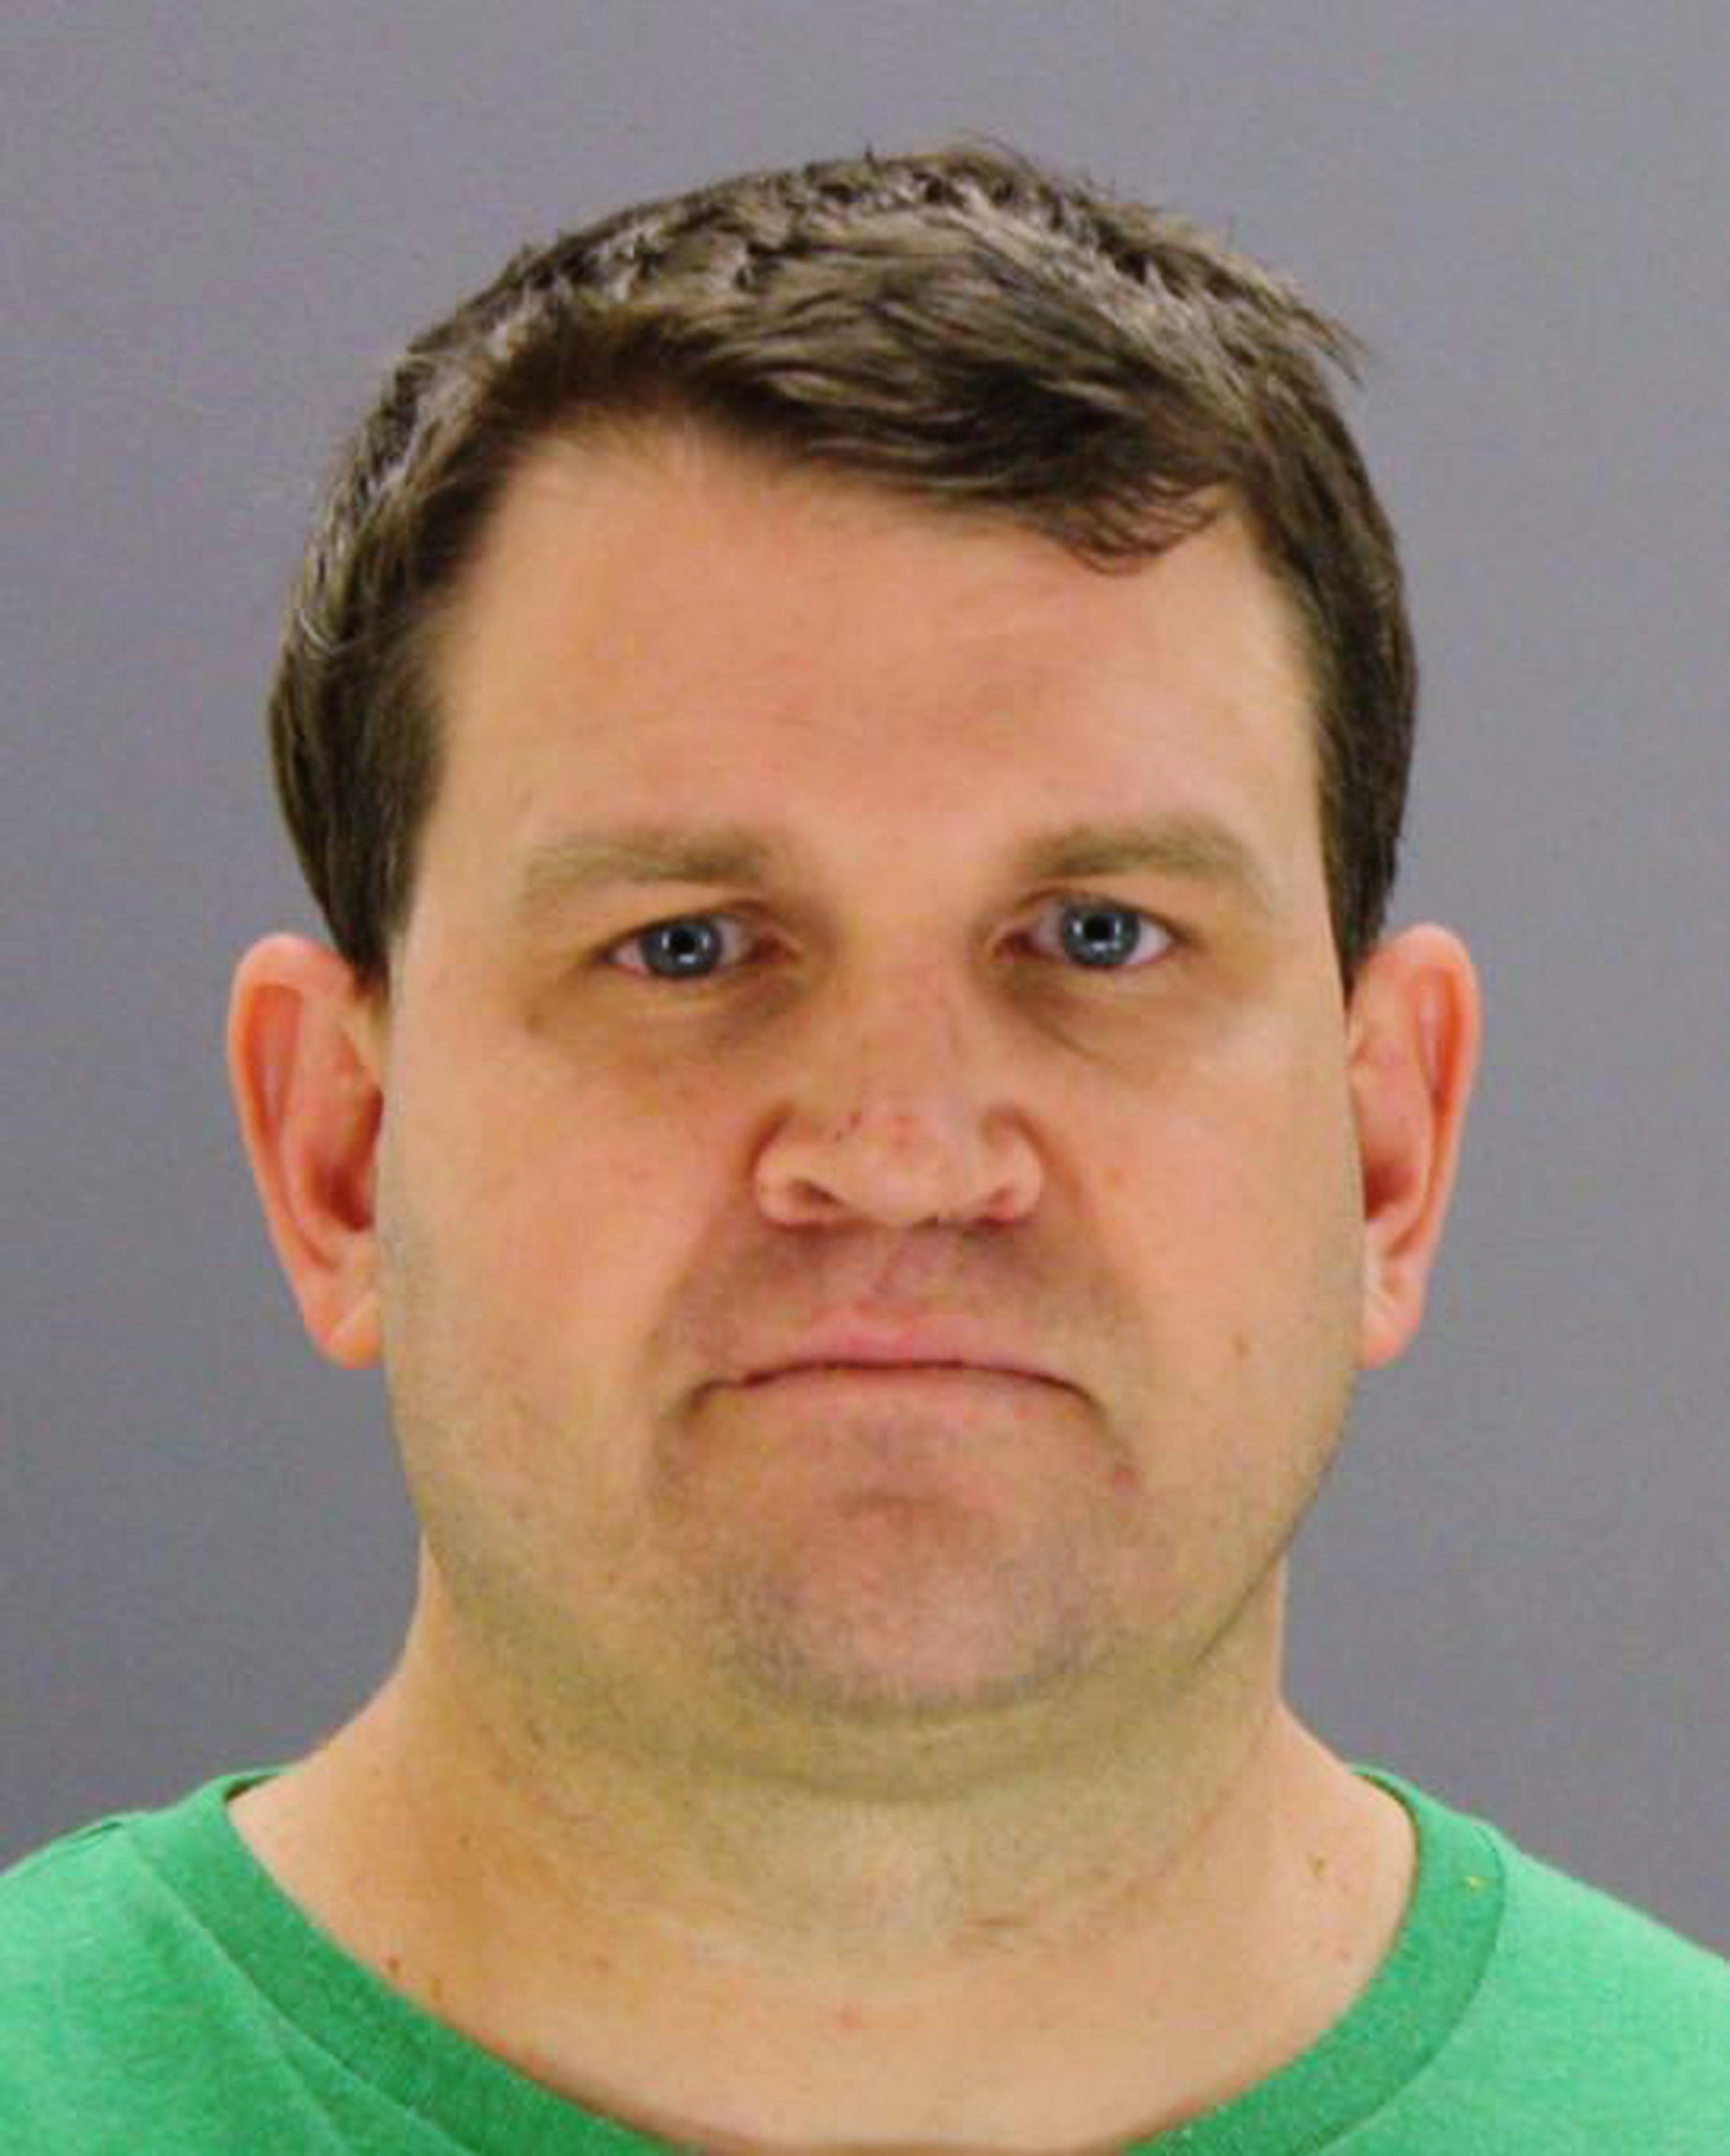 Christopher Duntsch in a photo provided by the Dallas County Jail